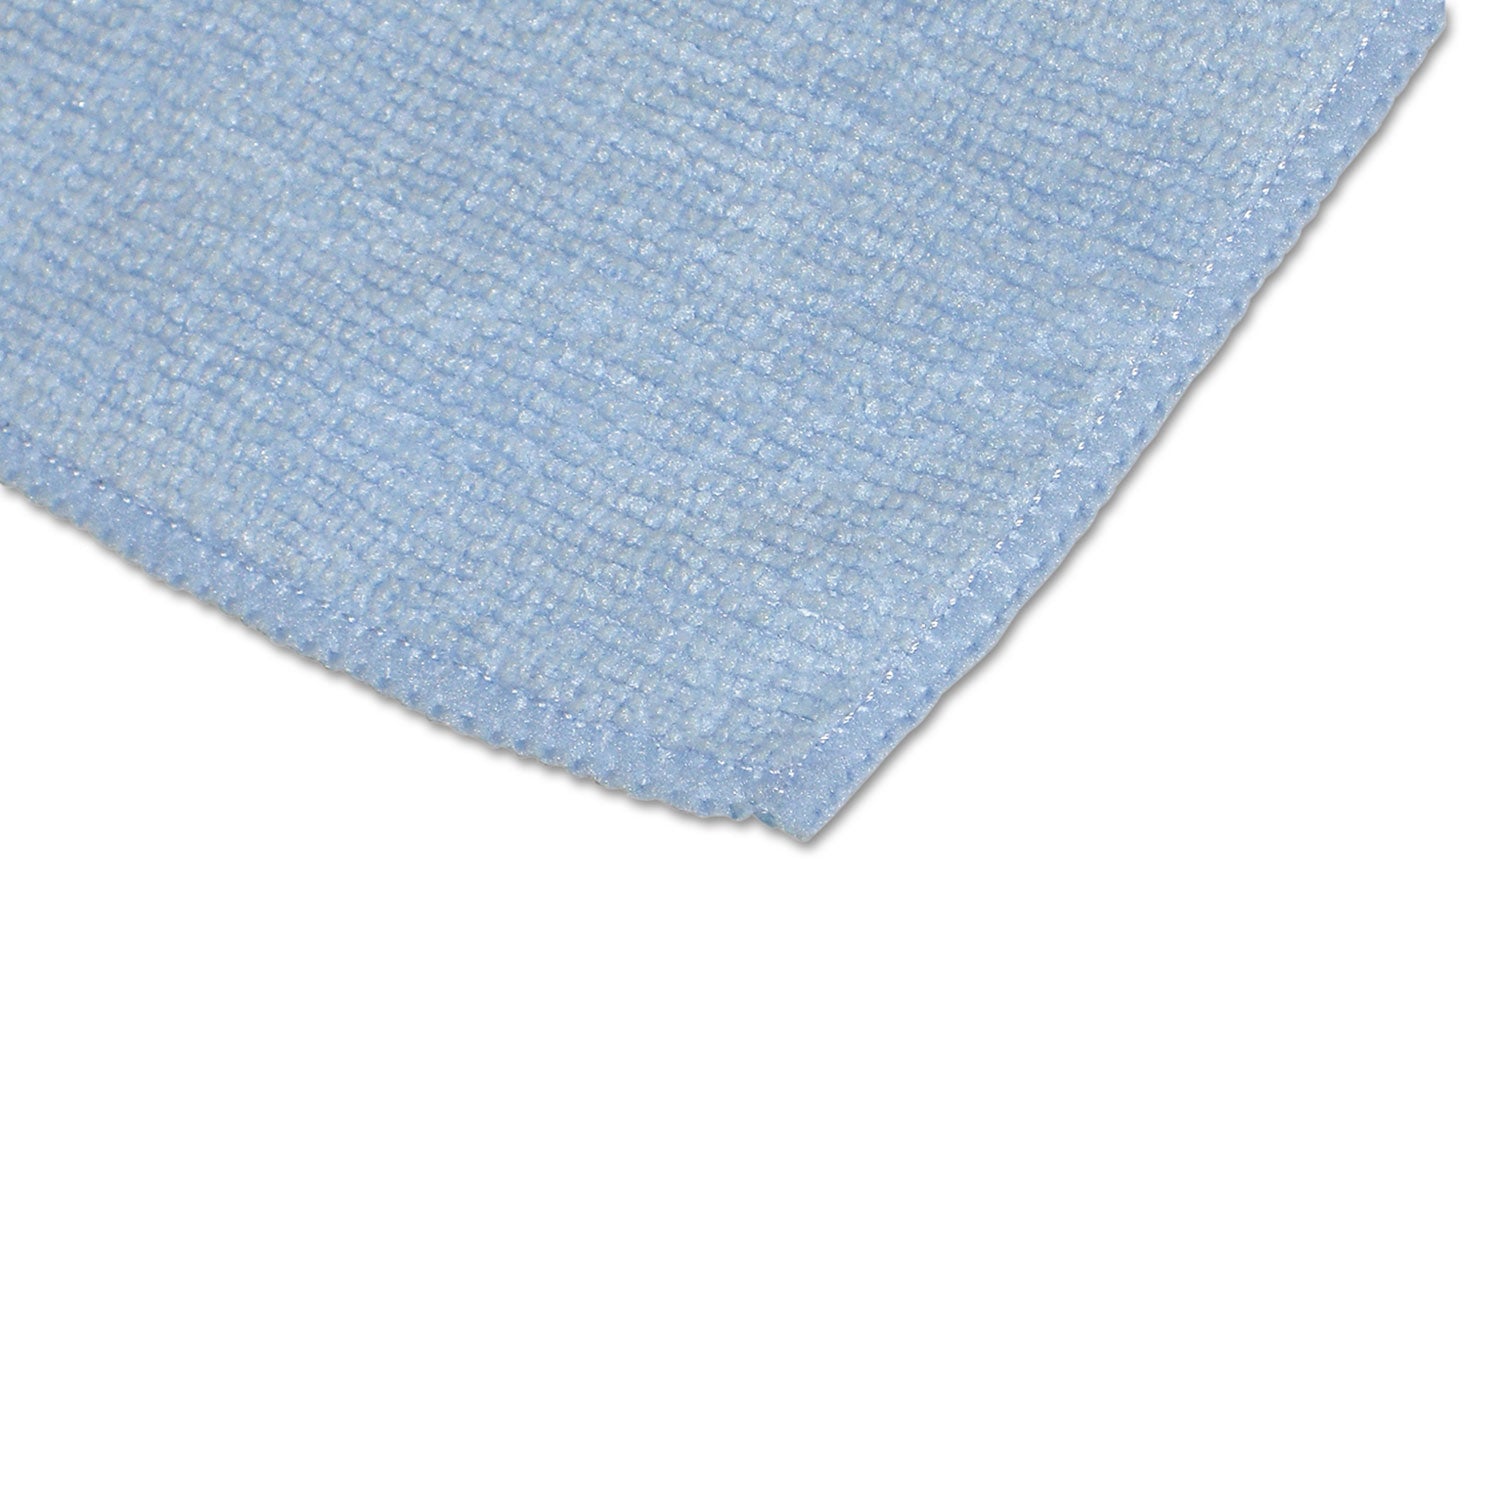 Large-Sized Microfiber Towels Two-Pack, 15 x 15, Unscented, Blue, 2/Pack - 